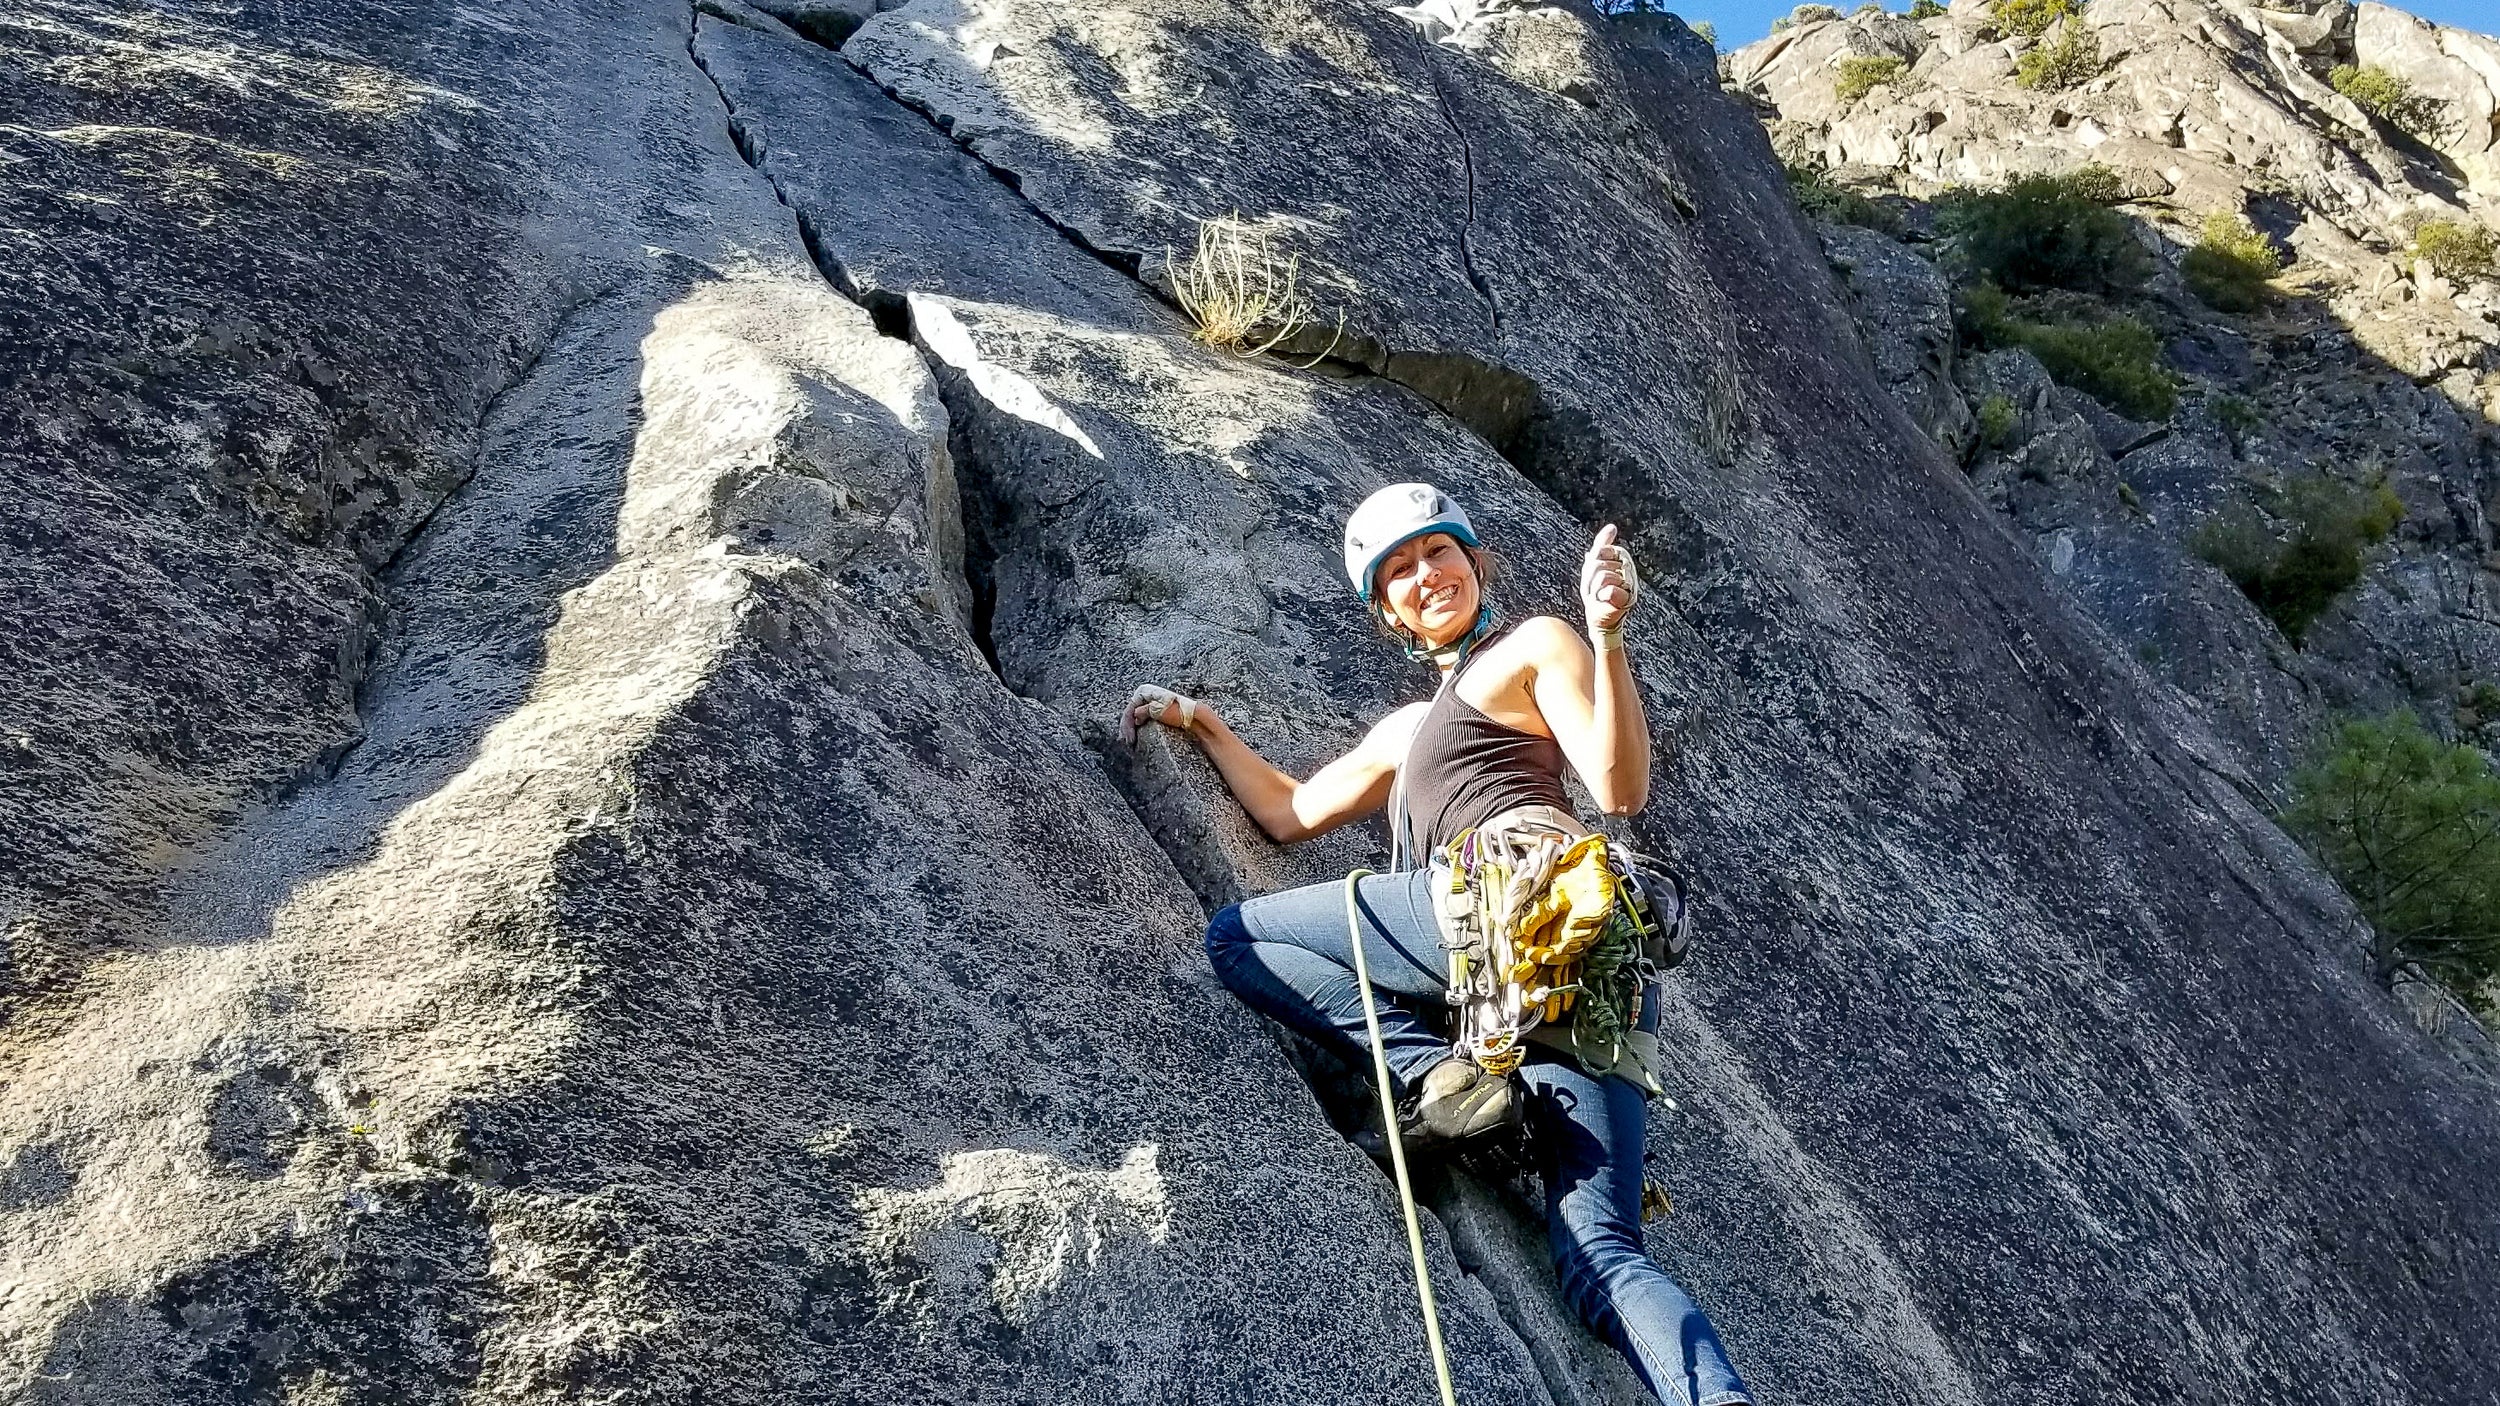 Rock climber on a face in North Lake Tahoe during a Blackbird Guides Rock Climbing Private course